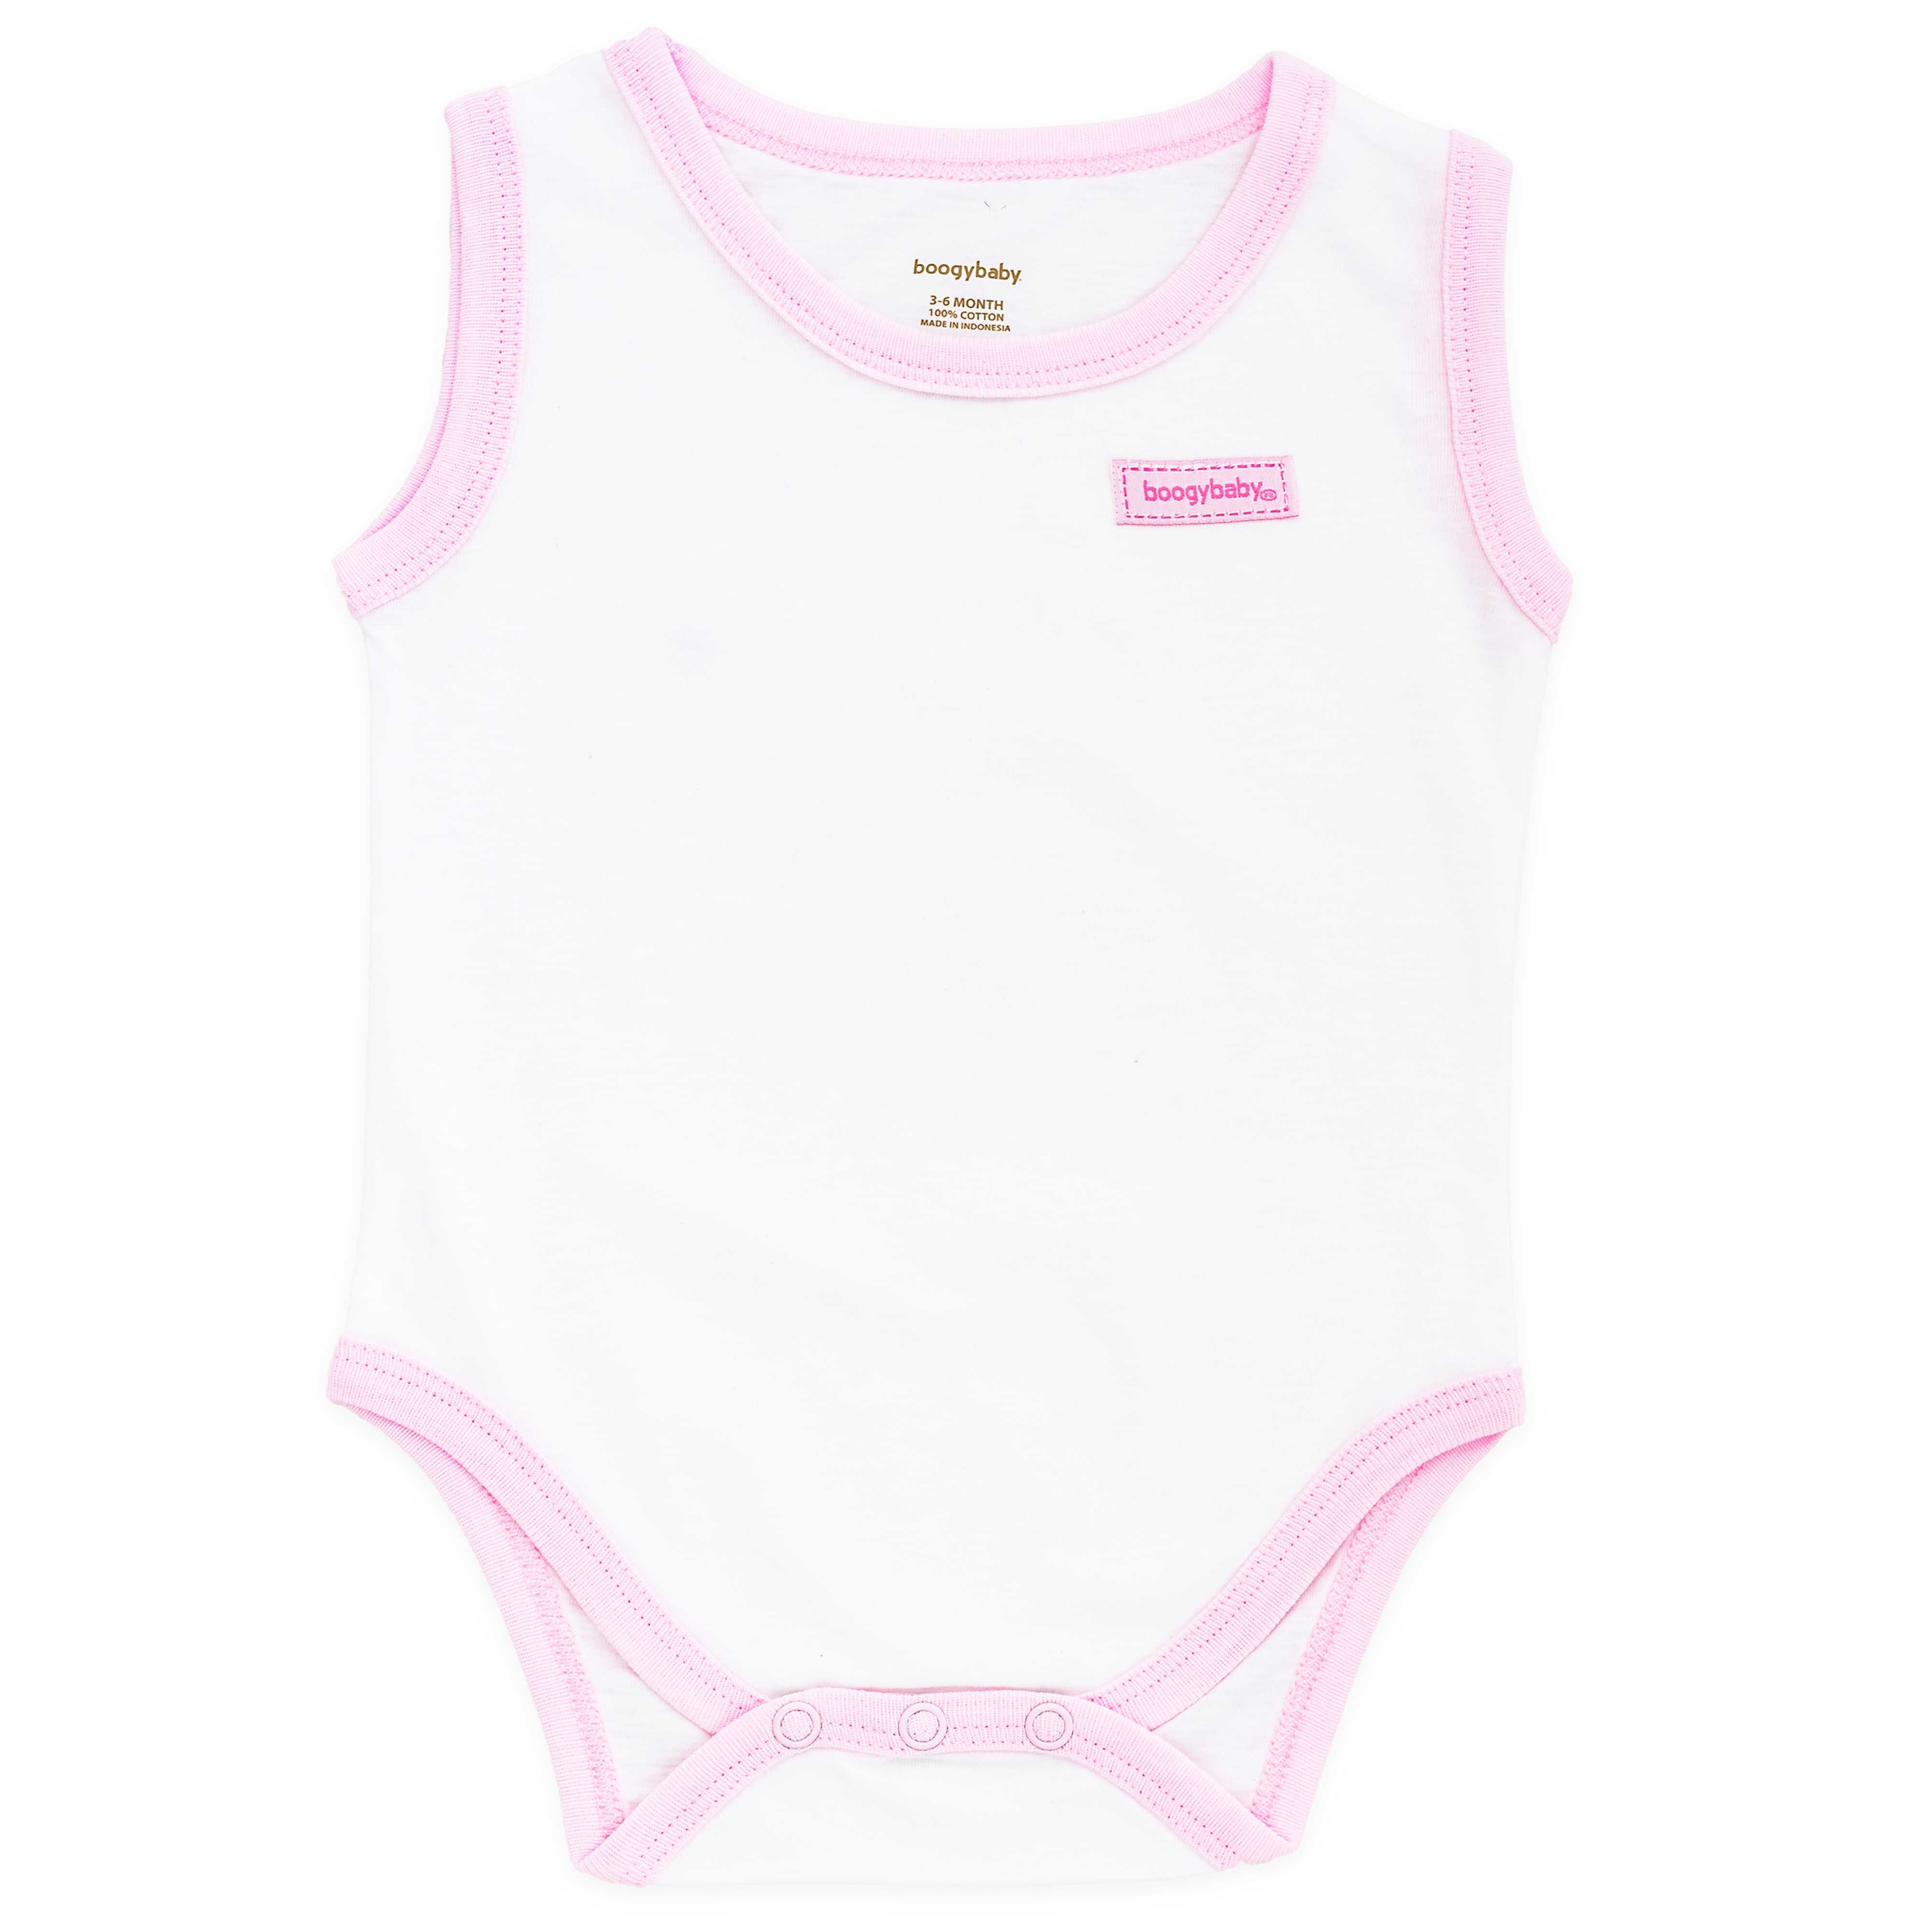 Boogybaby Sleeveless Suit -0-3Month-Pink - 1